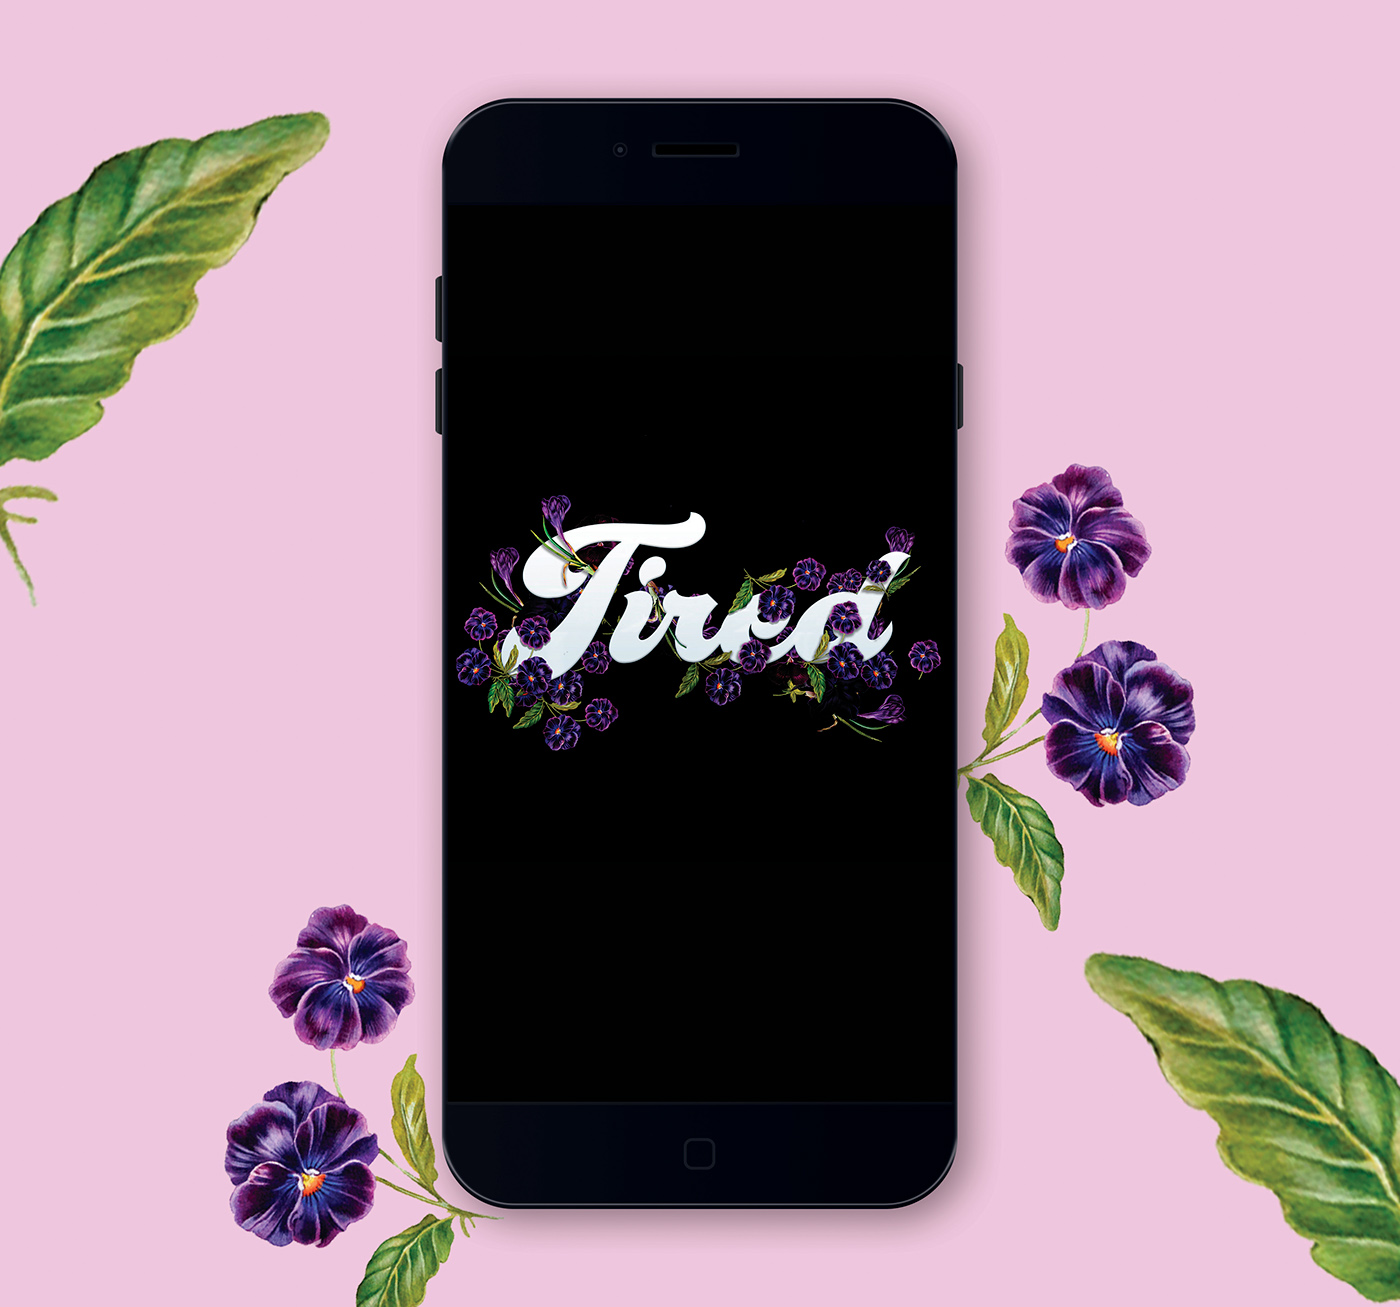 #tired #type #floral #flores #pink #pastel  #graphicDesign #diseñografico #Diseño #Botanical